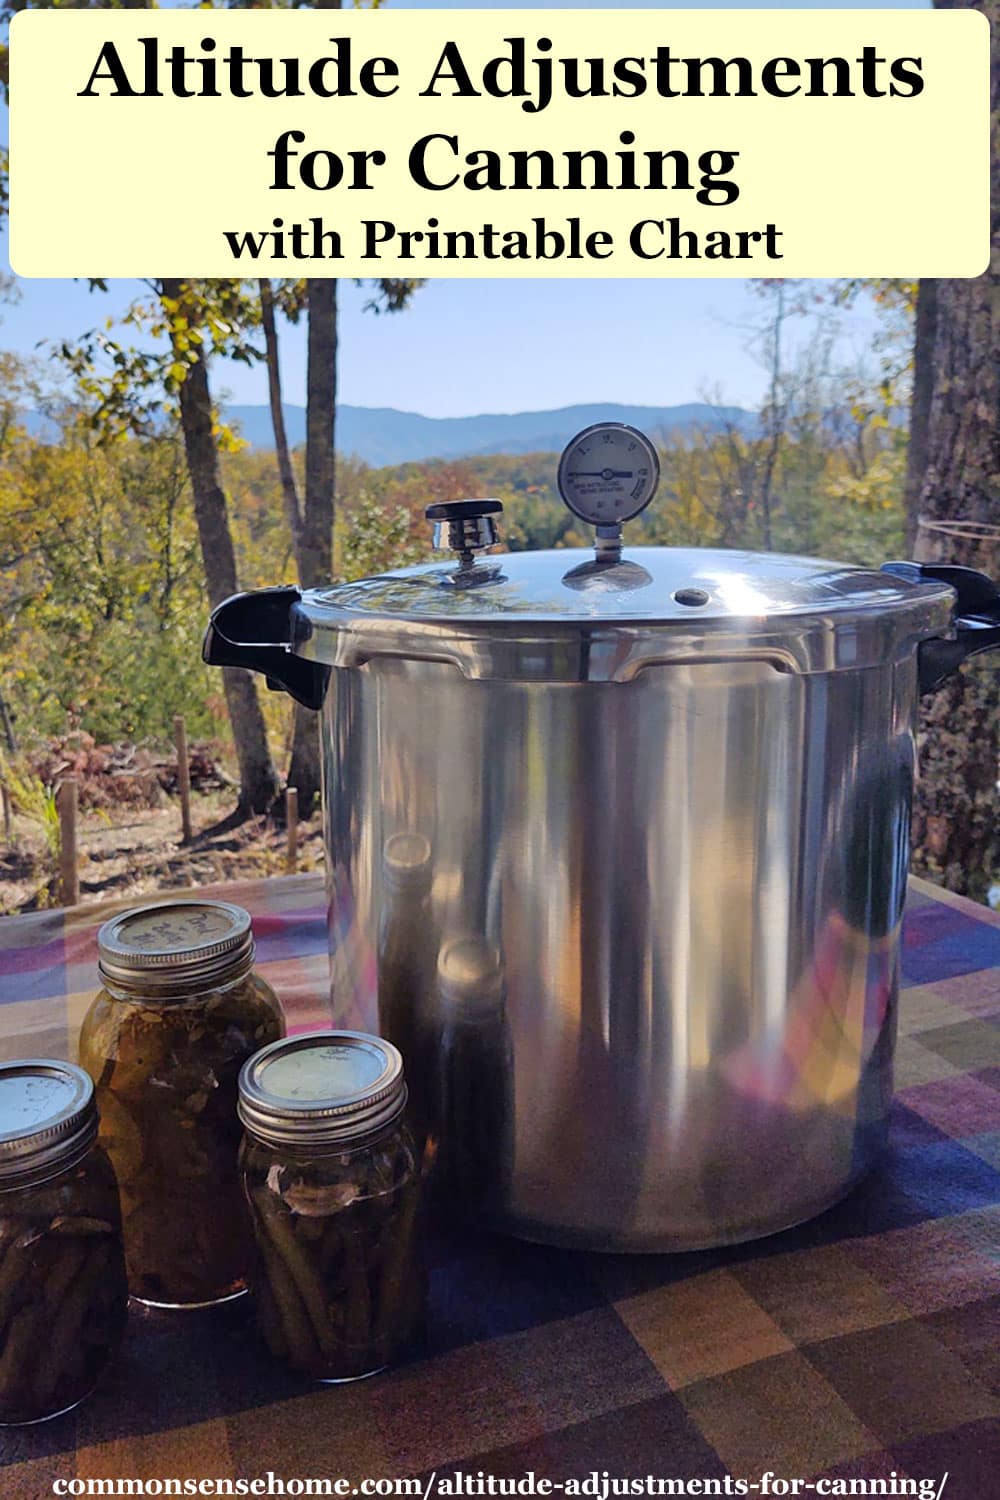 Altitude Adjustments for Canning - Hot Water Bath and Pressure Canning